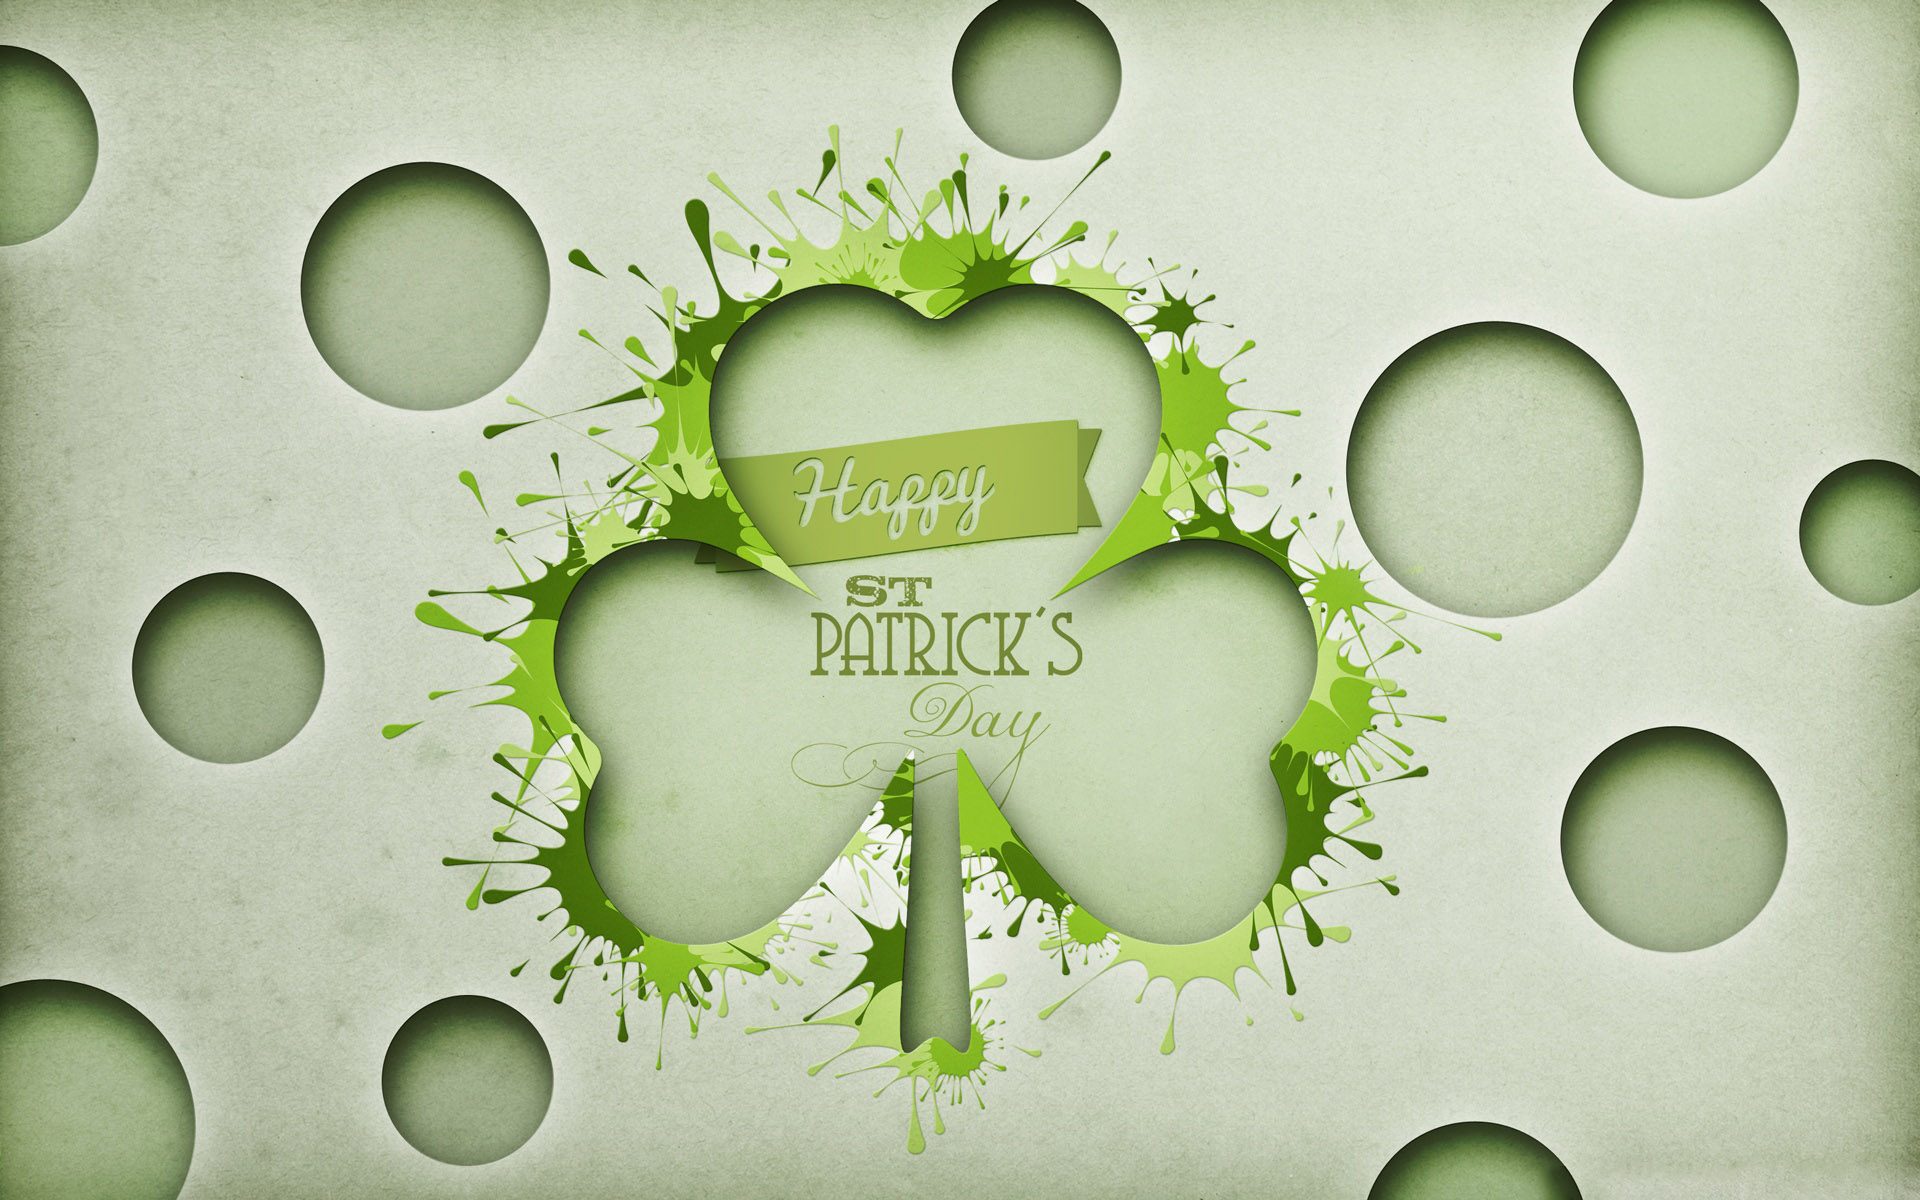 15100 St Patricks Day Poster Stock Photos Pictures  RoyaltyFree Images   iStock  St patricks background